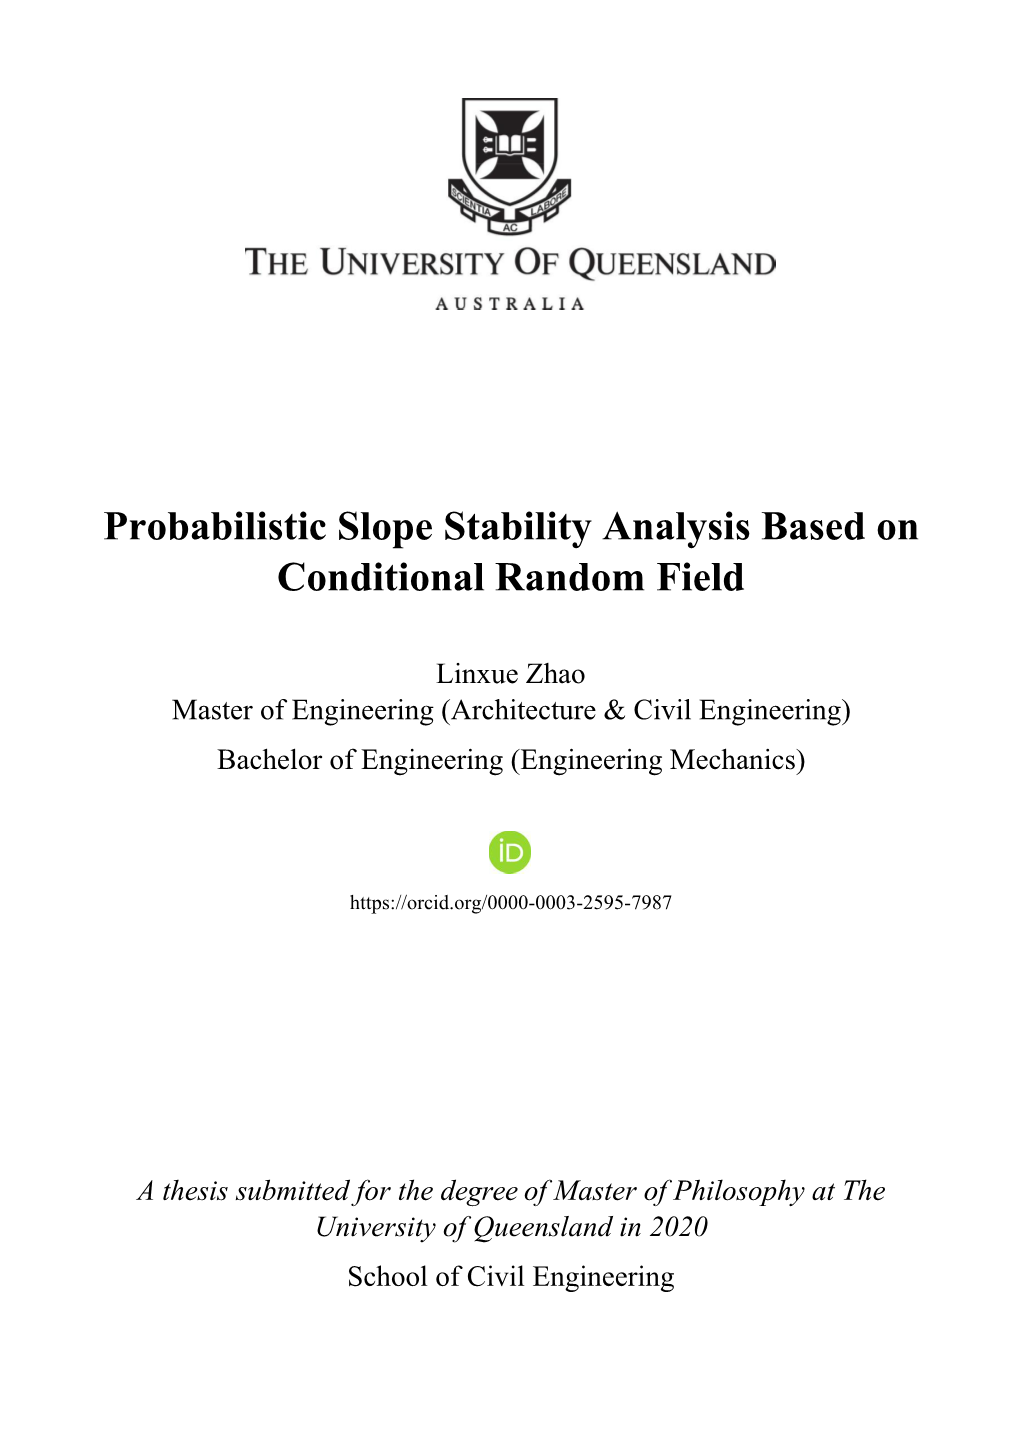 Probabilistic Slope Stability Analysis Based on Conditional Random Field